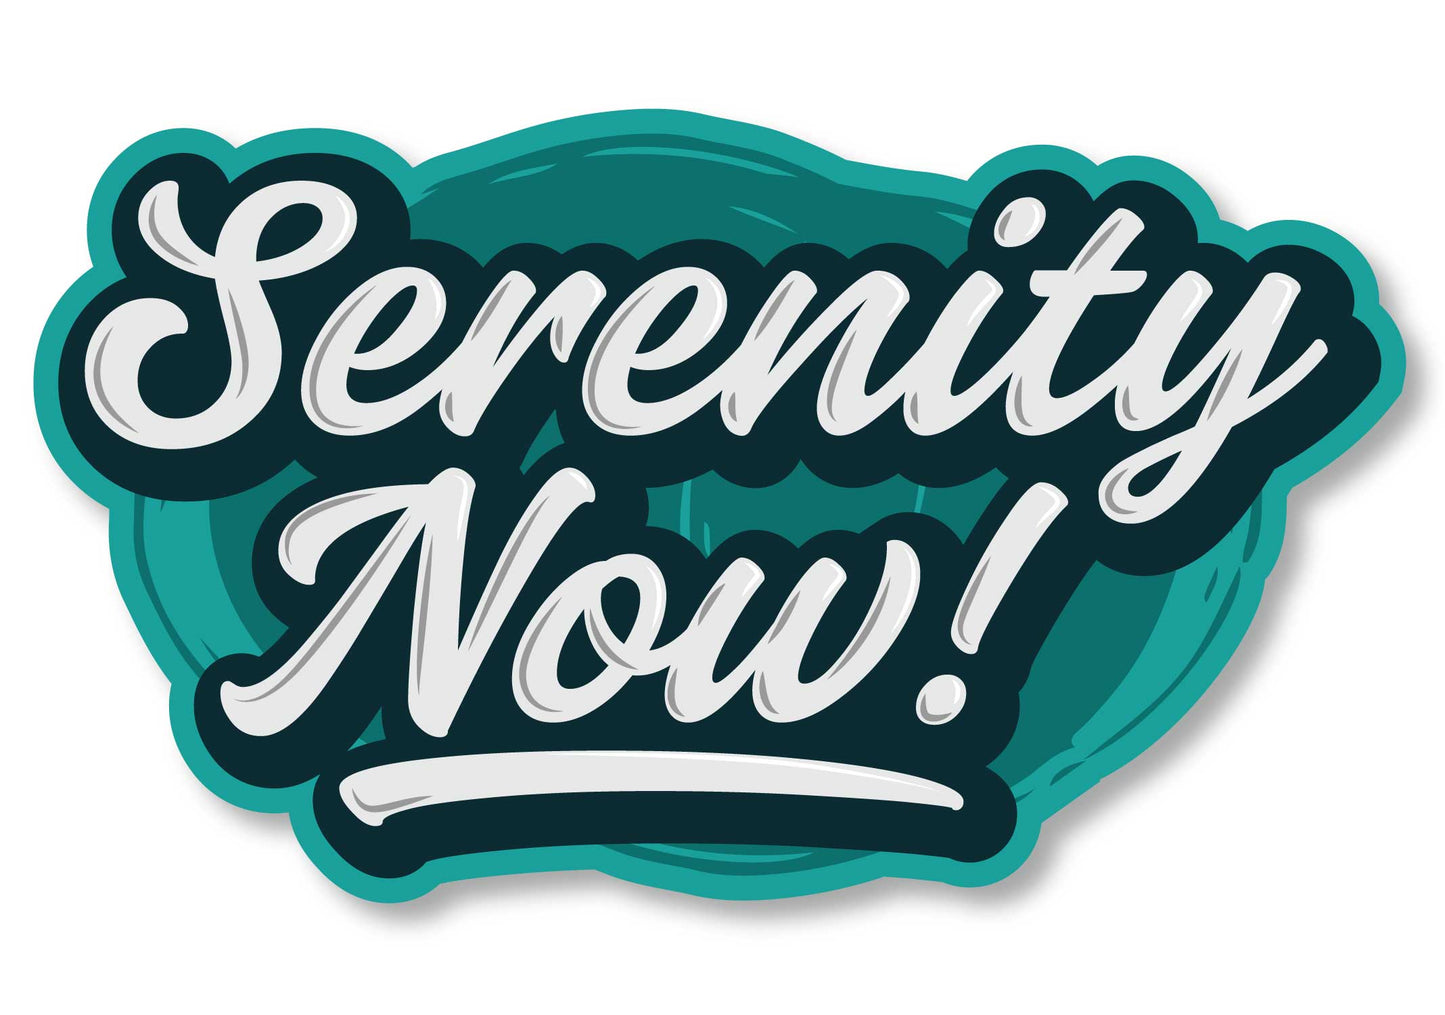 Serenity Now! Seinfeld Funny Decal (3"x5")